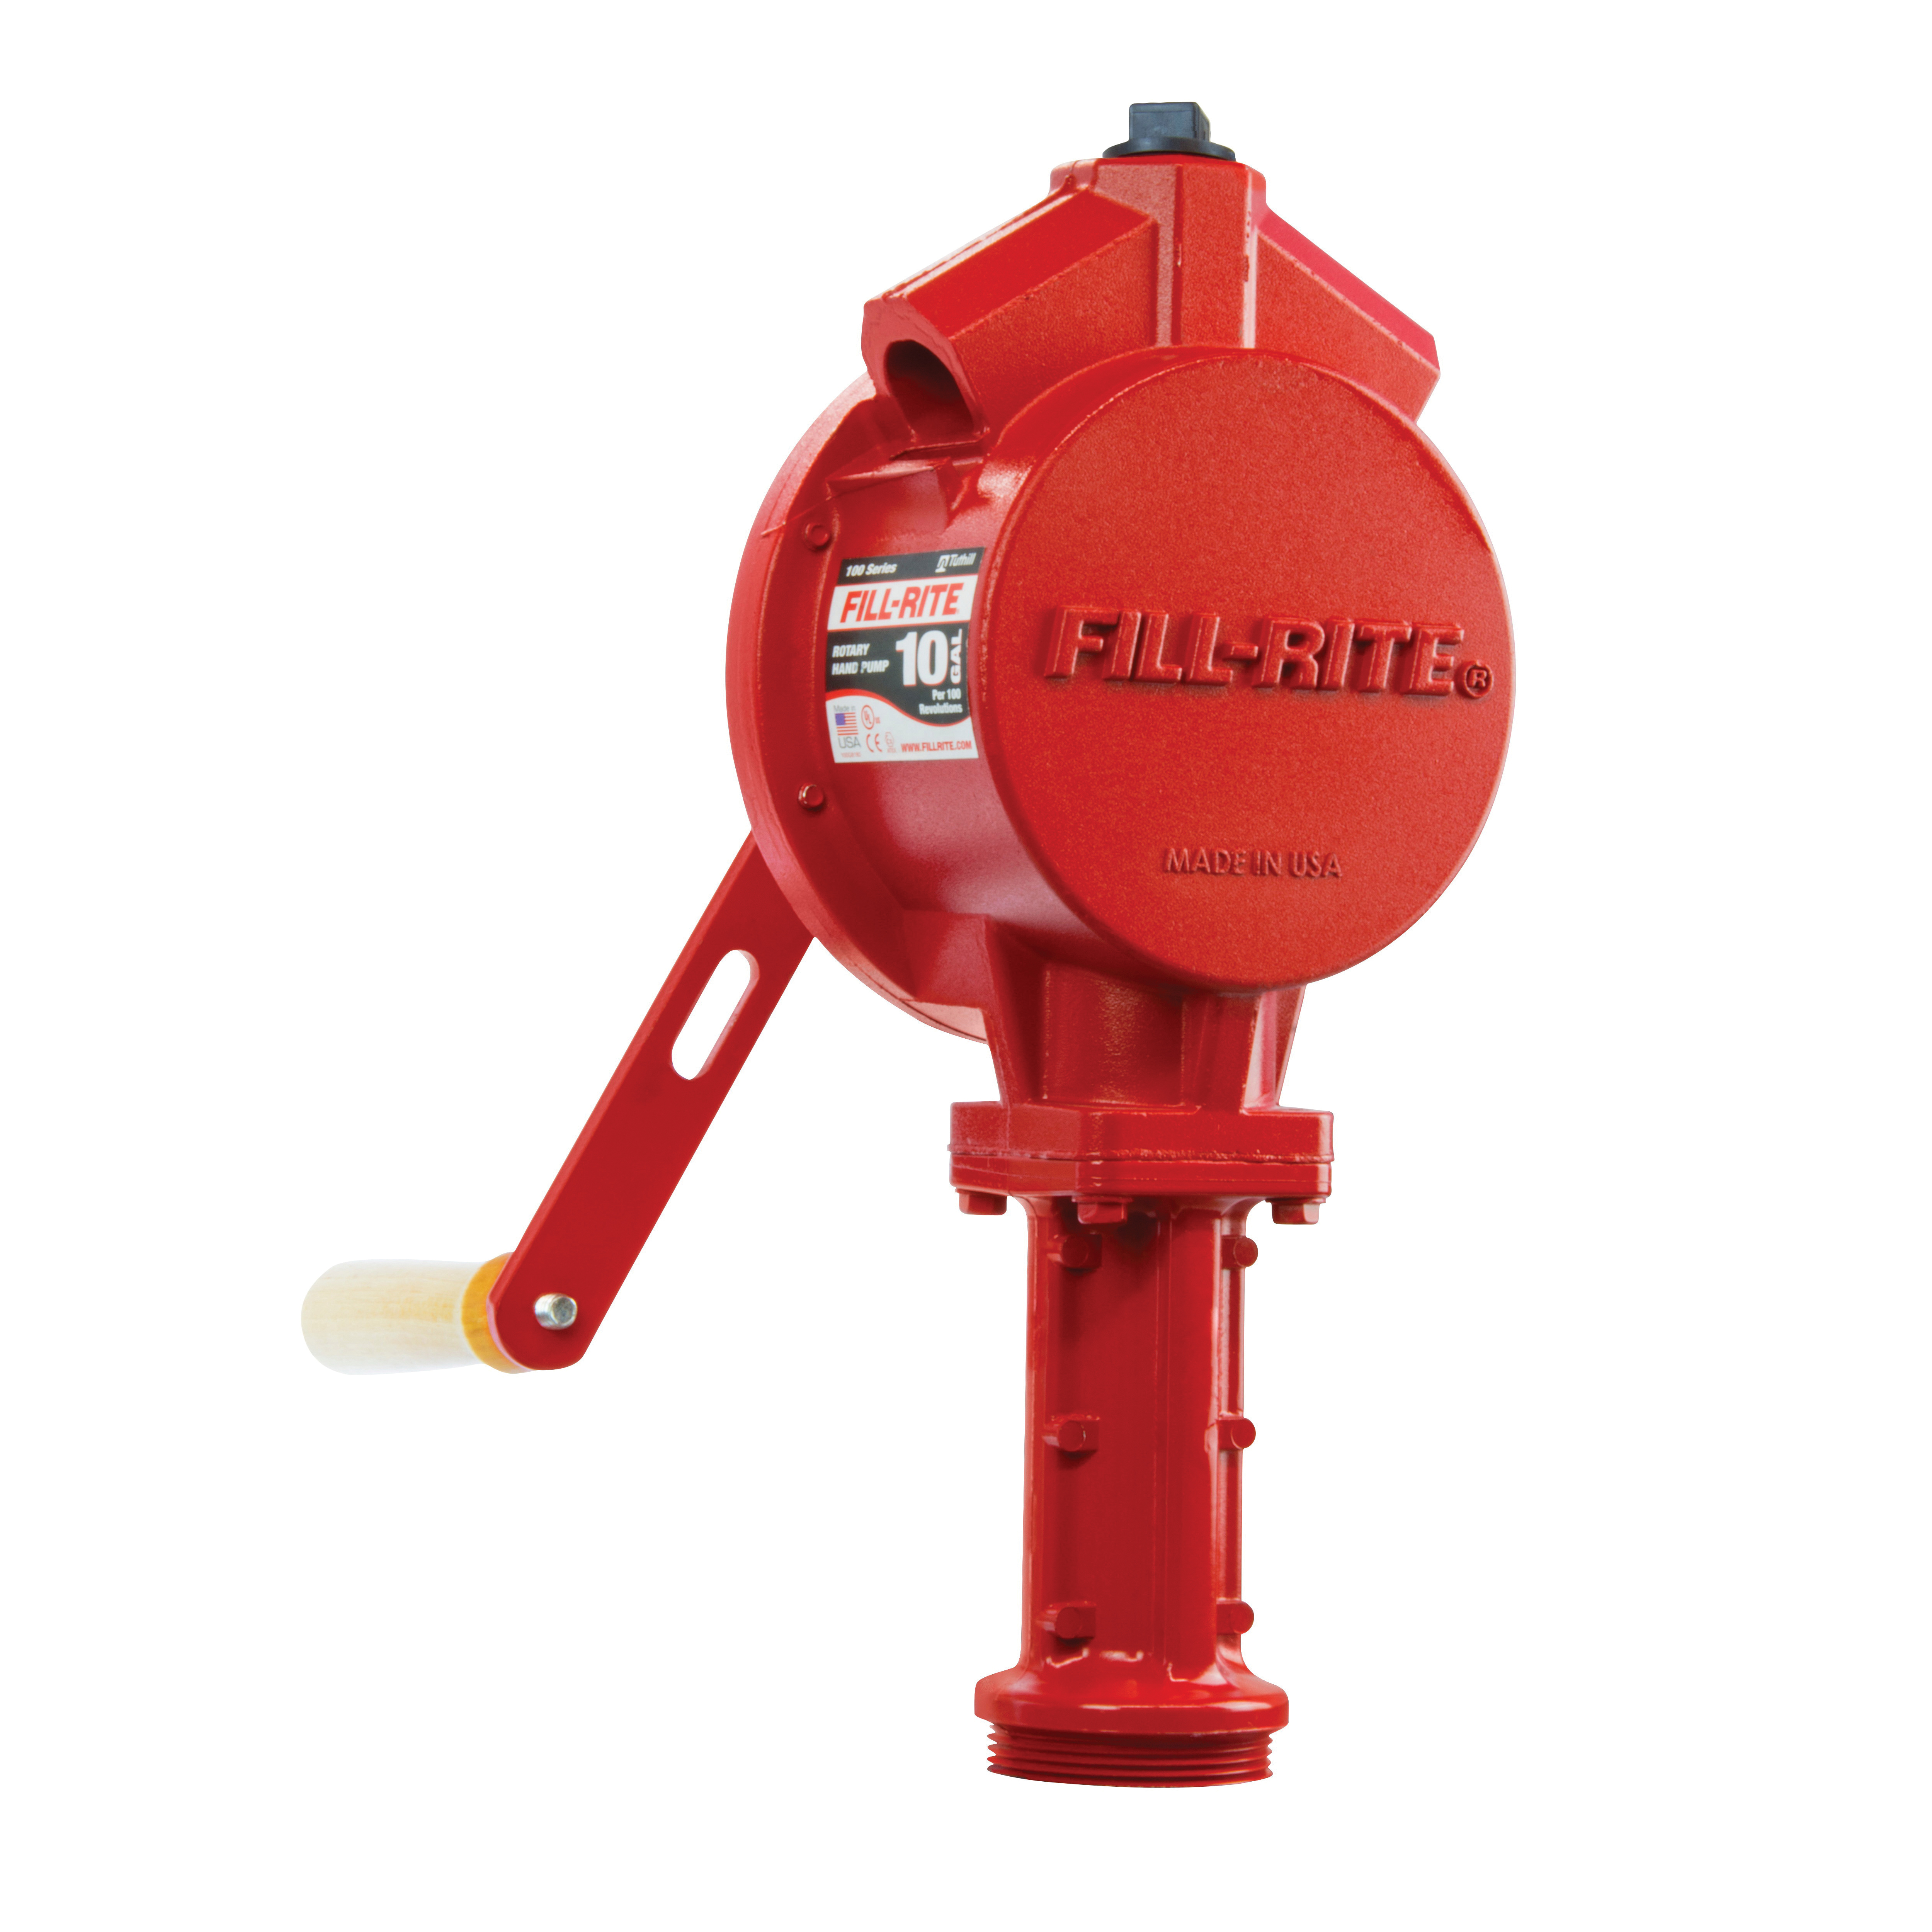 FILL-RITE® FR100 Series FR110 Hand-Operated Fuel Transfer Pump, 10 gpm, Aluminum Housing Material